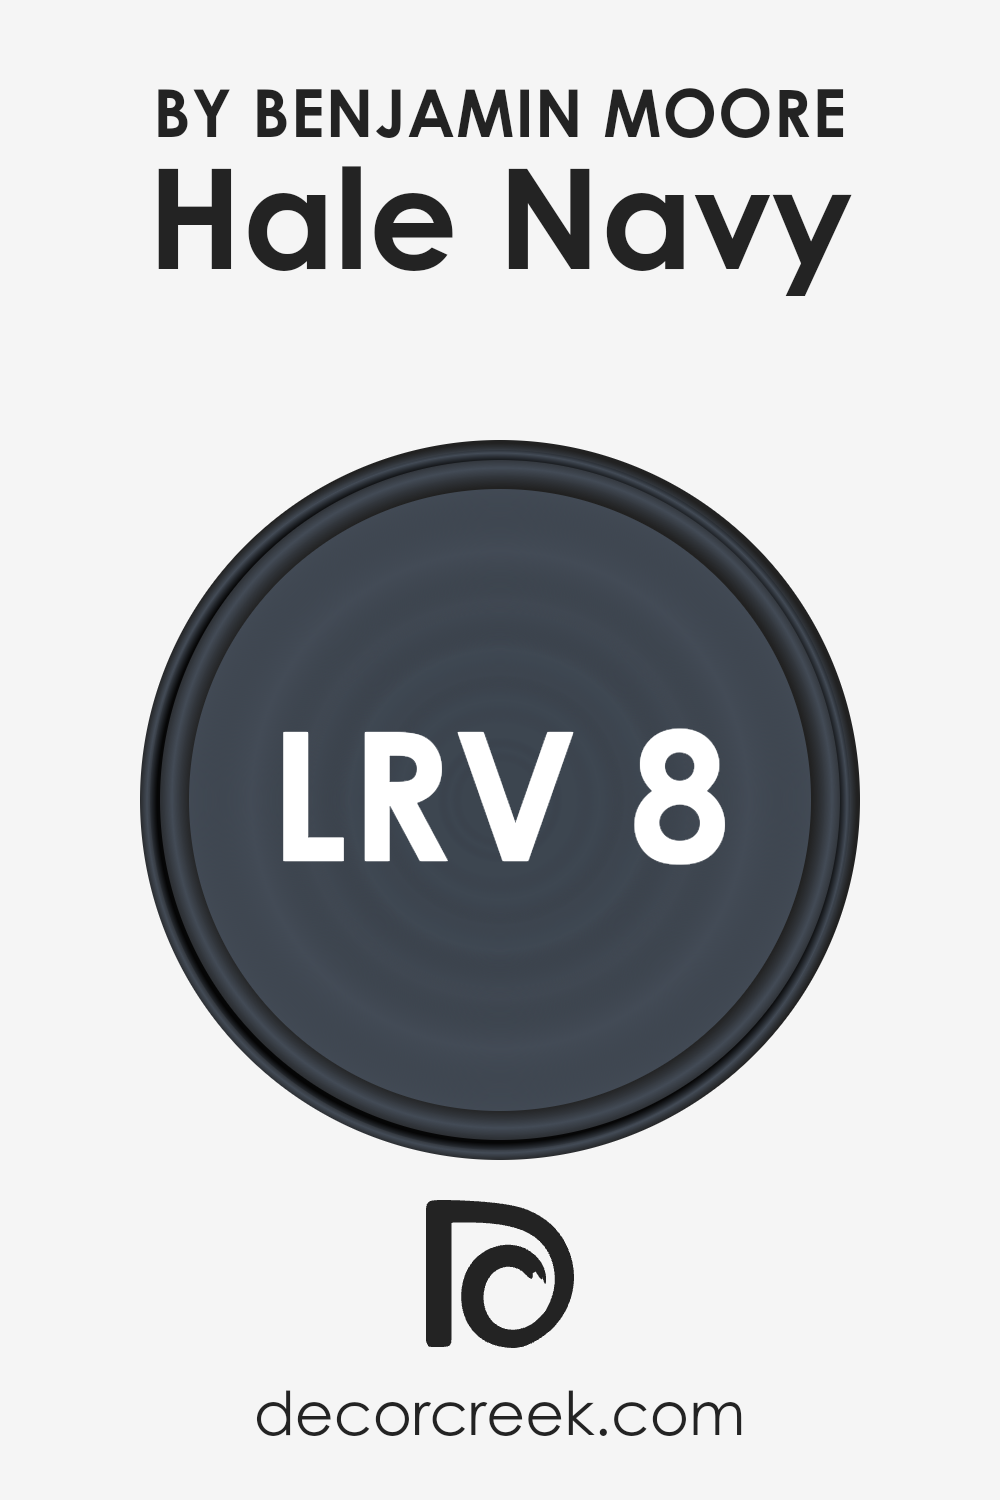 what_is_the_lrv_of_hale_navy_hc_154